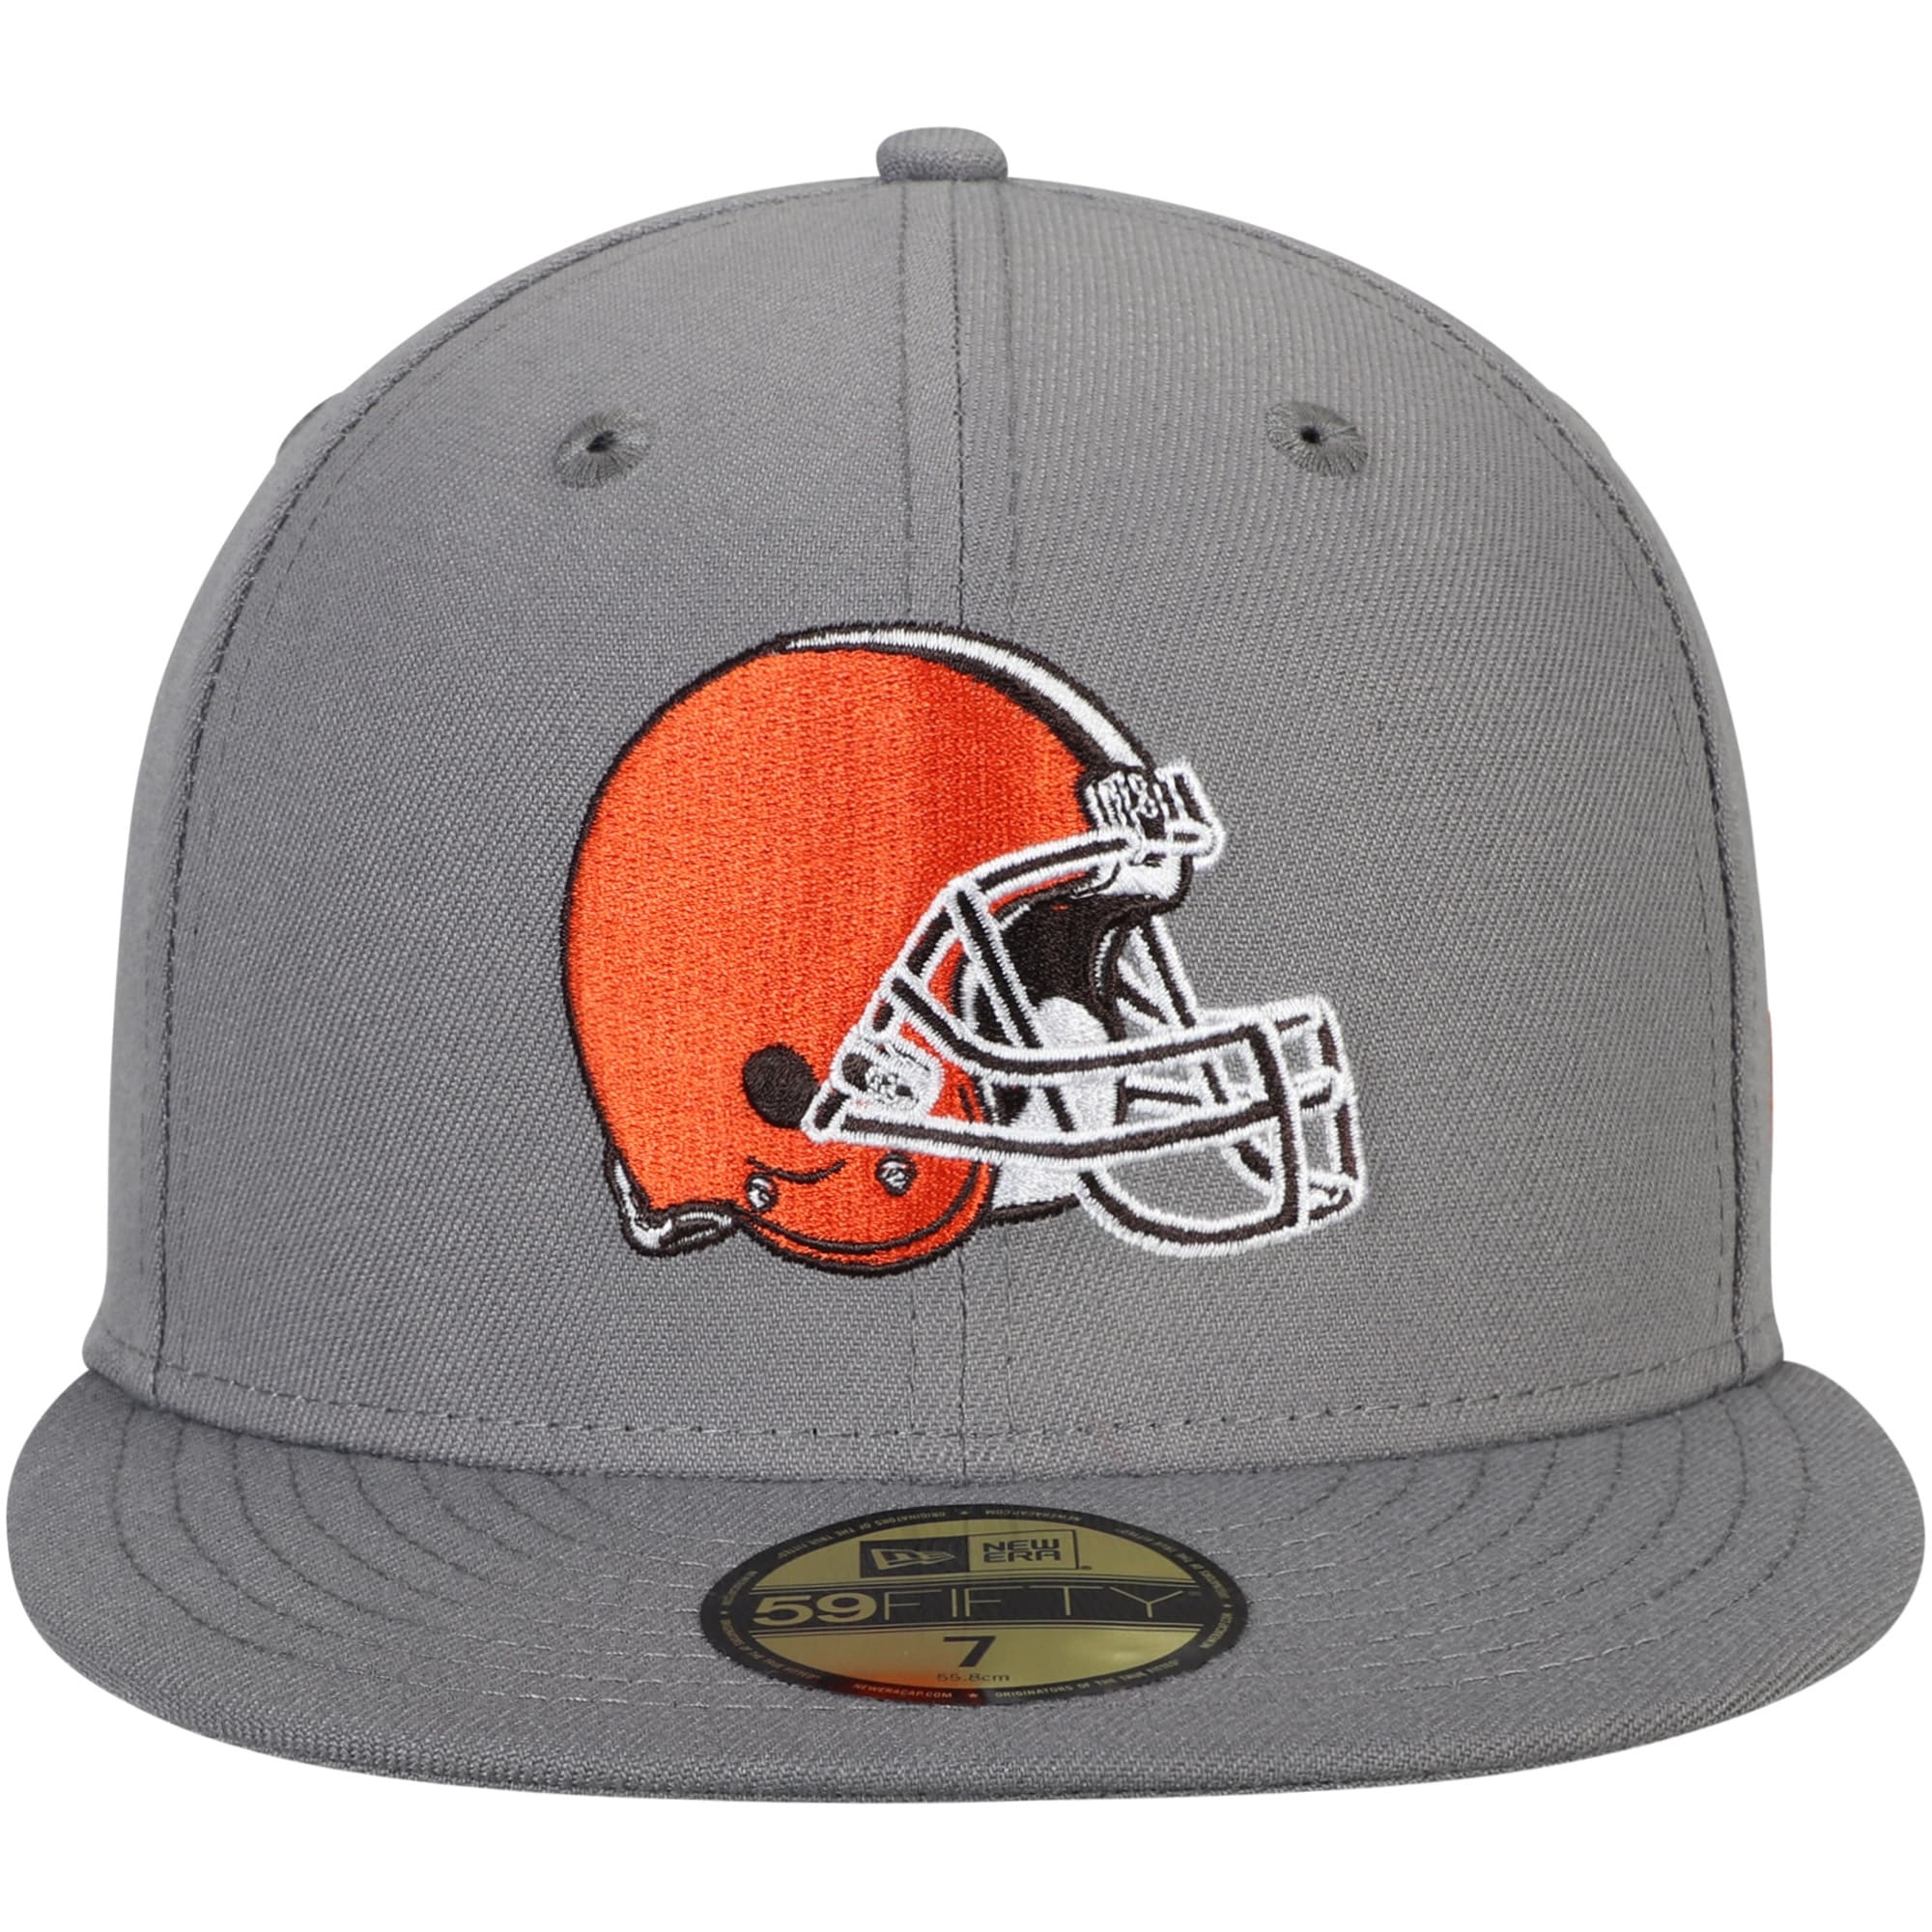 Men's New Era Graphite Cleveland Browns Storm 59FIFTY Fitted Hat - image 2 of 4